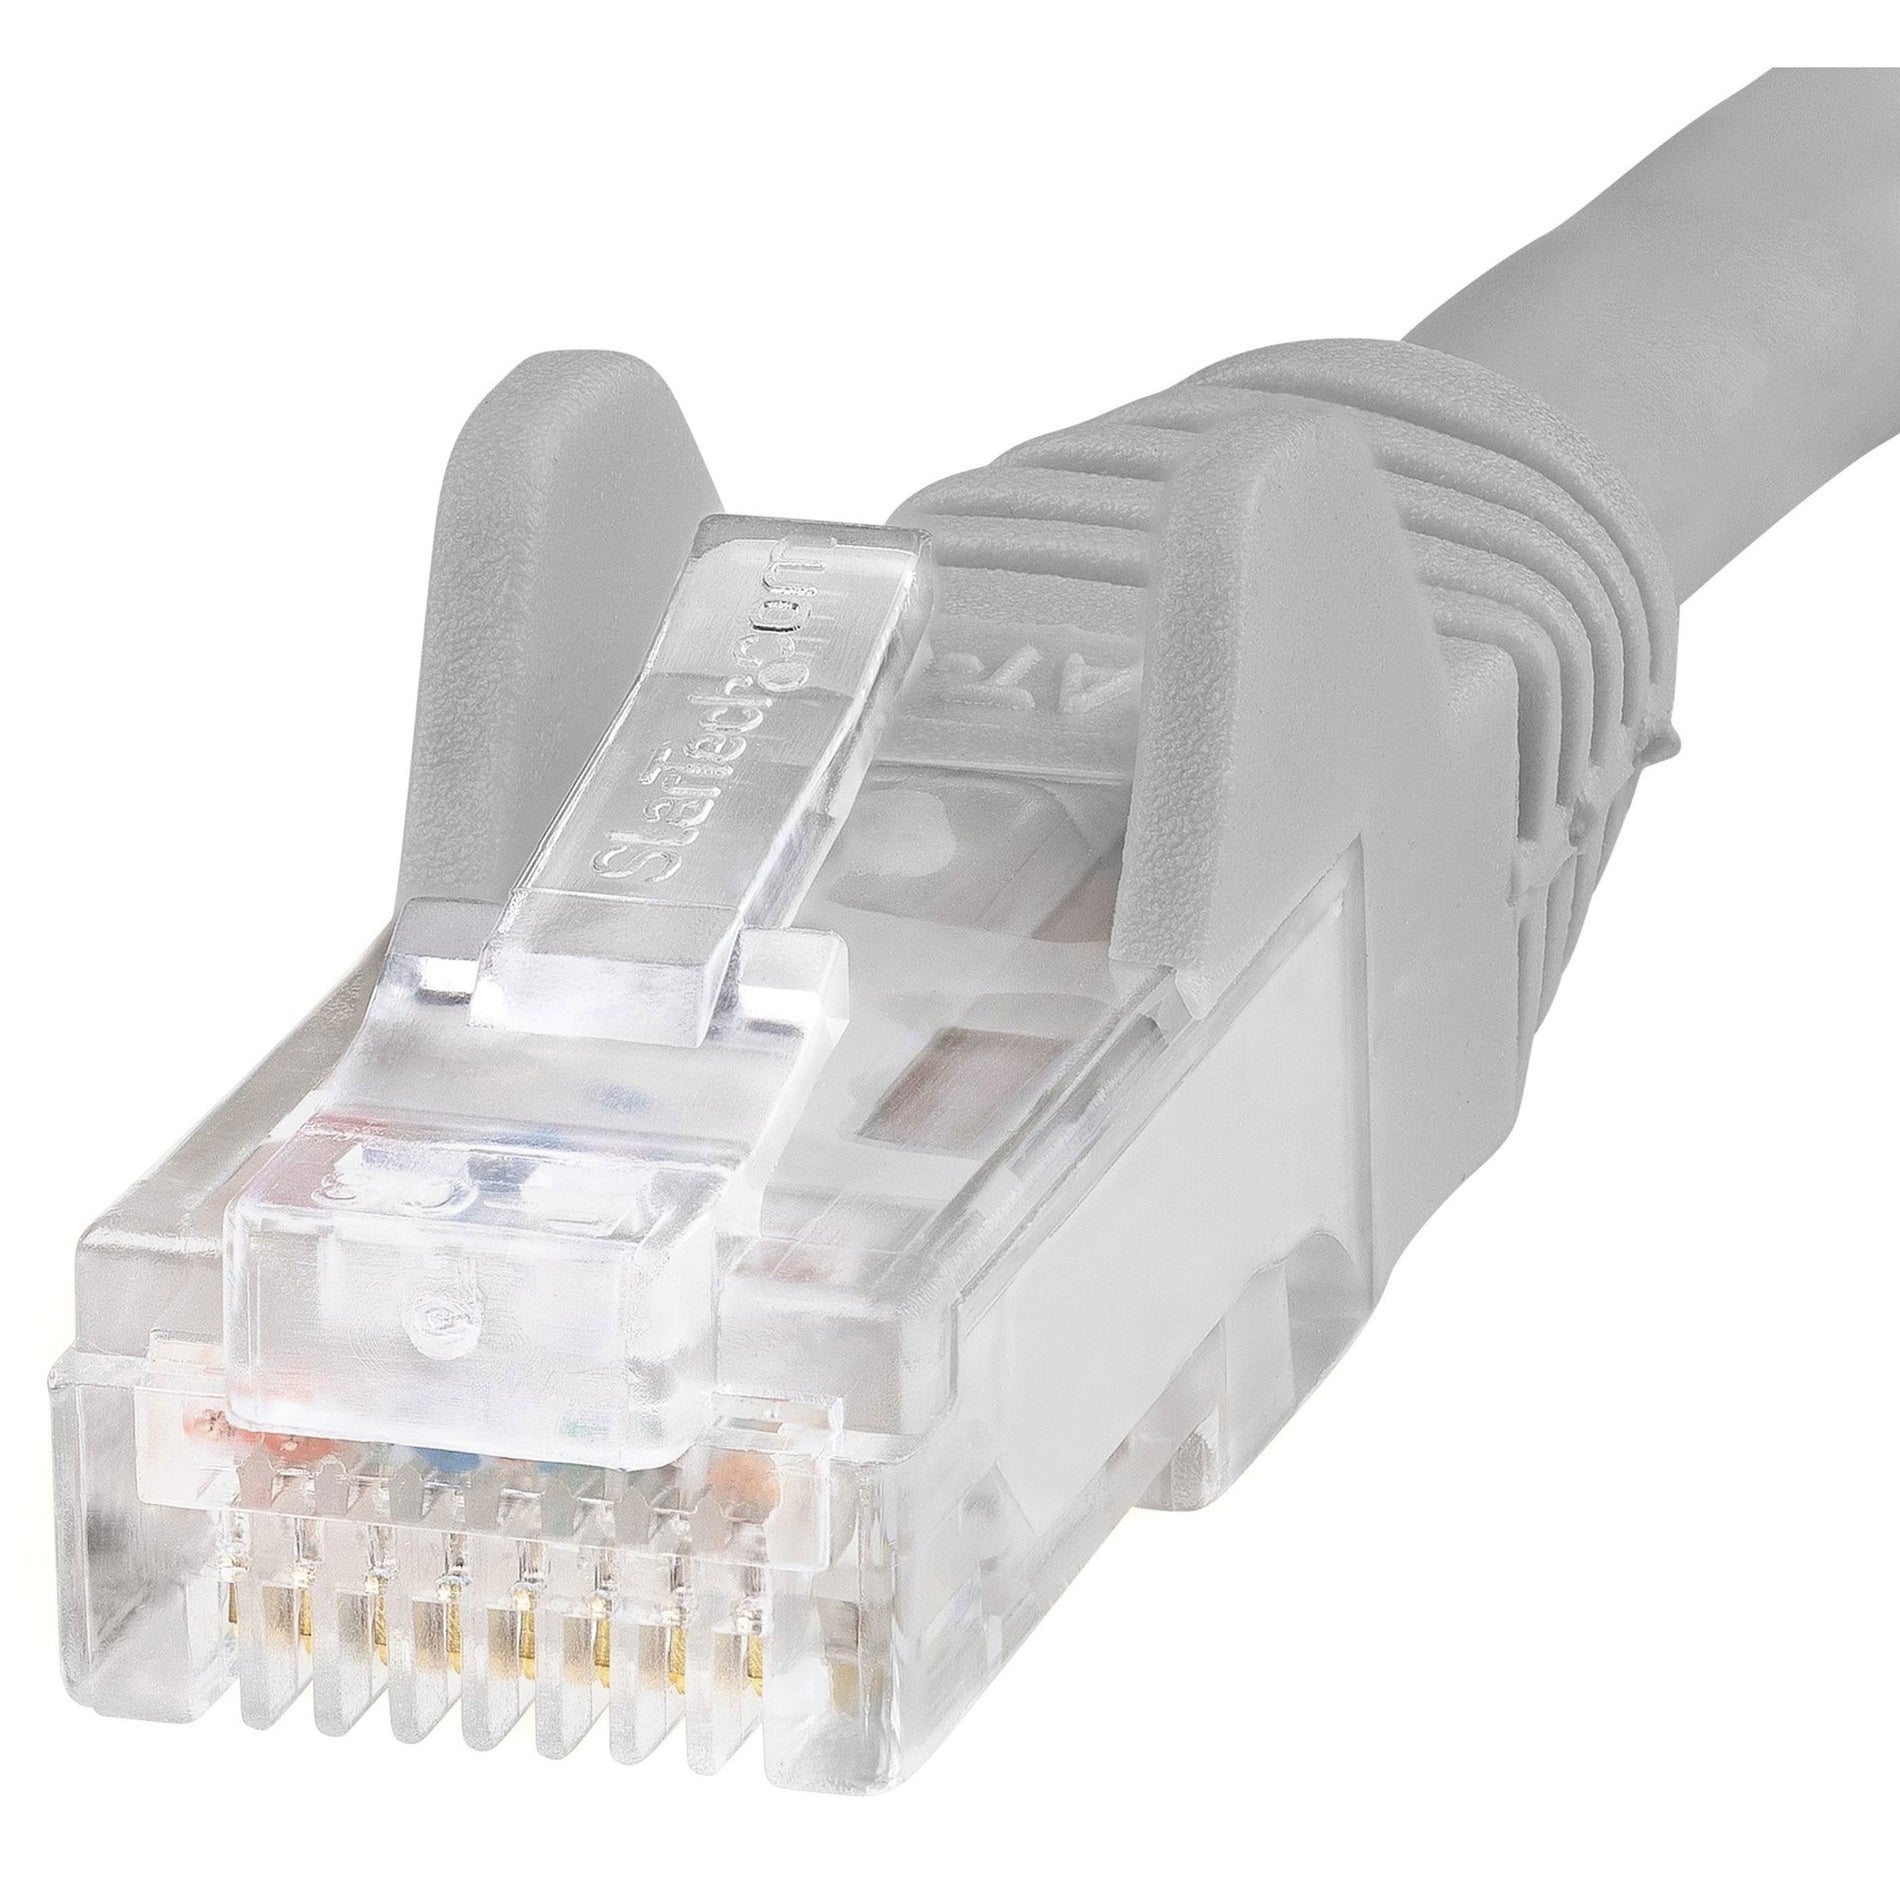 StarTech.com N6PATCH1GR Cat.6 Patch Network Cable, 1 ft Gray Ethernet Cable, Snagless RJ45 Connectors